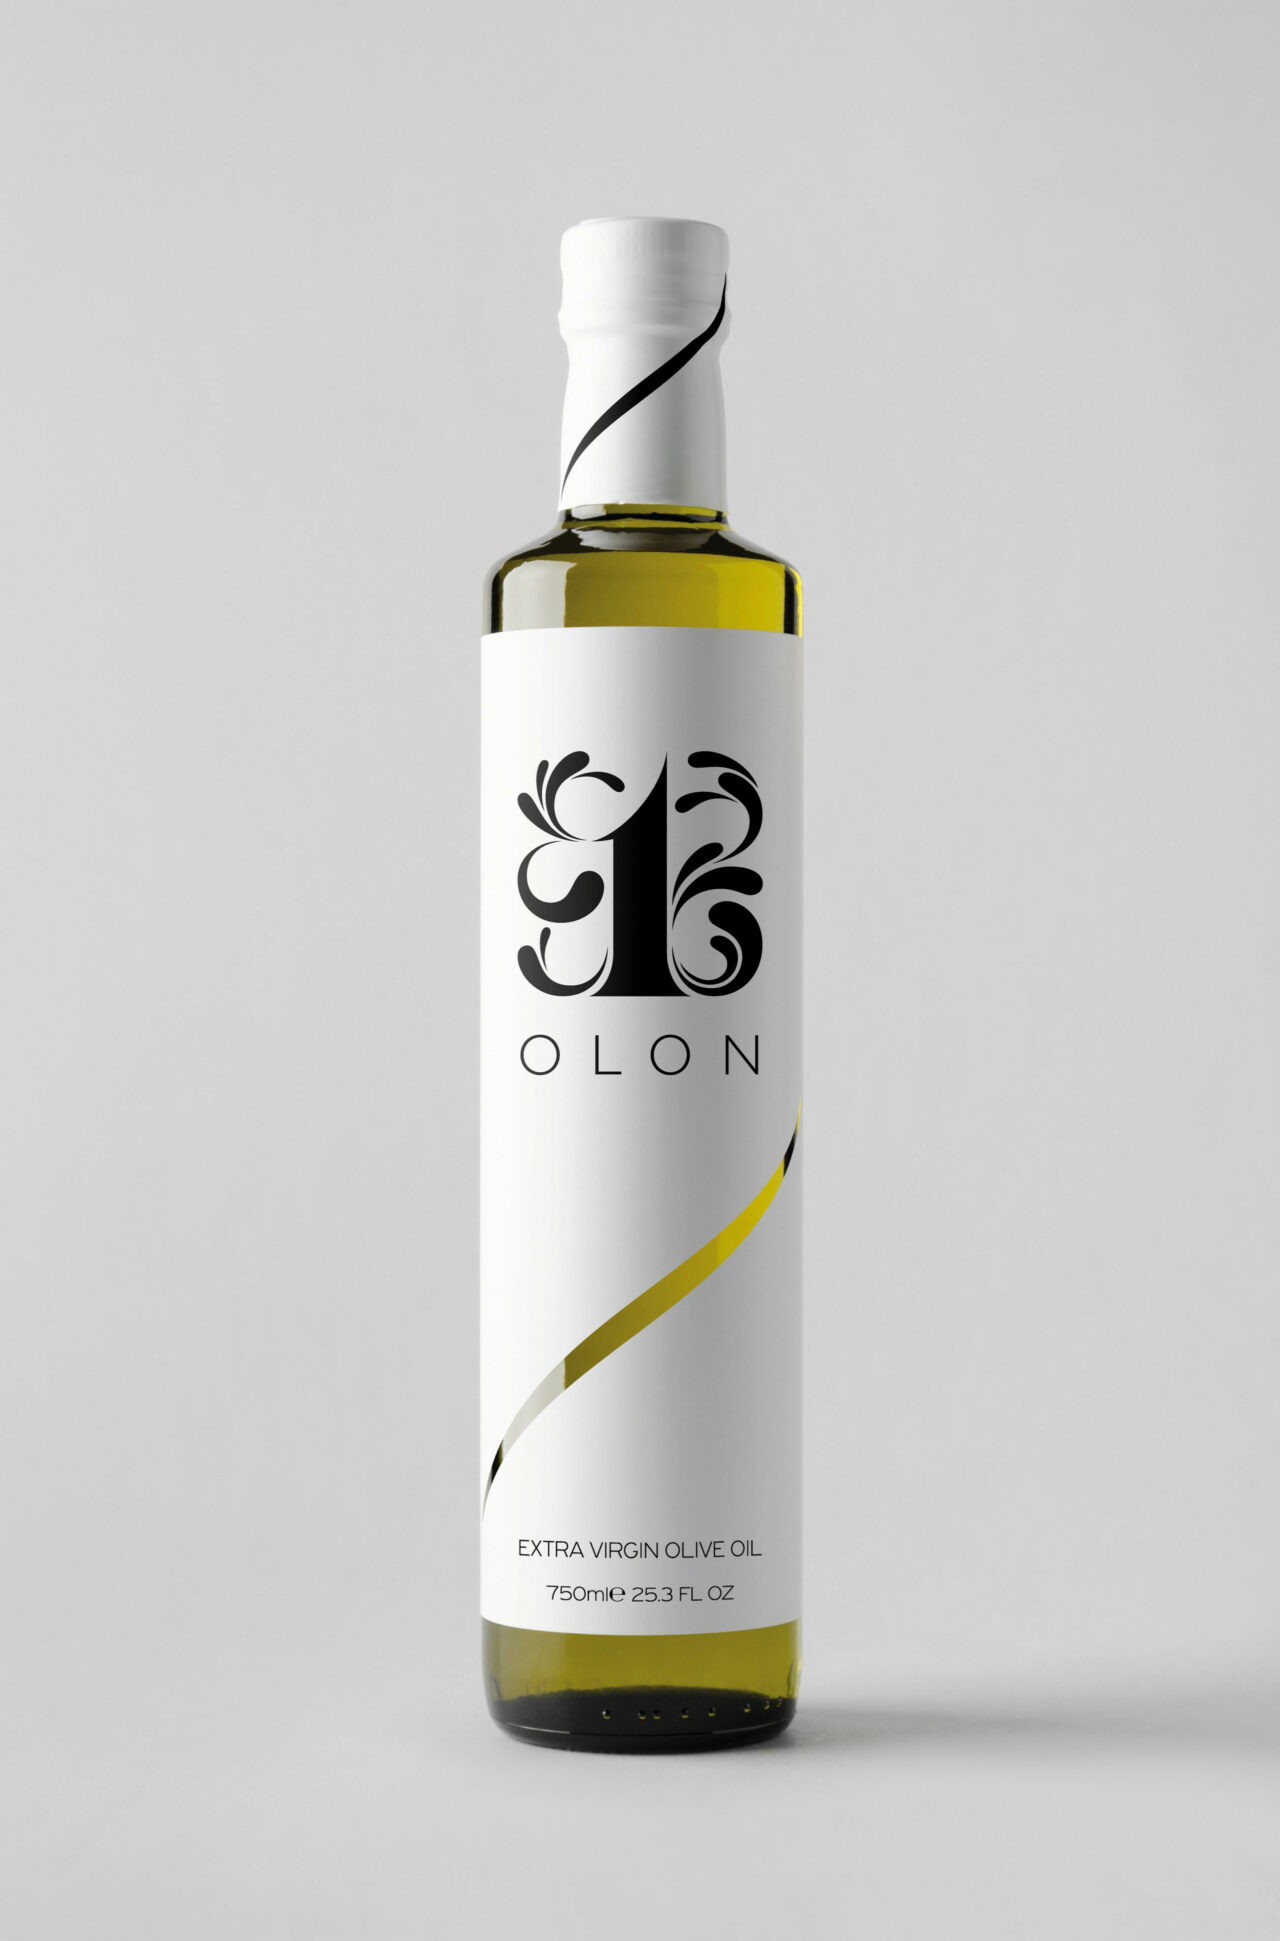 Extra virgin olive oil awarded branding and creative label design